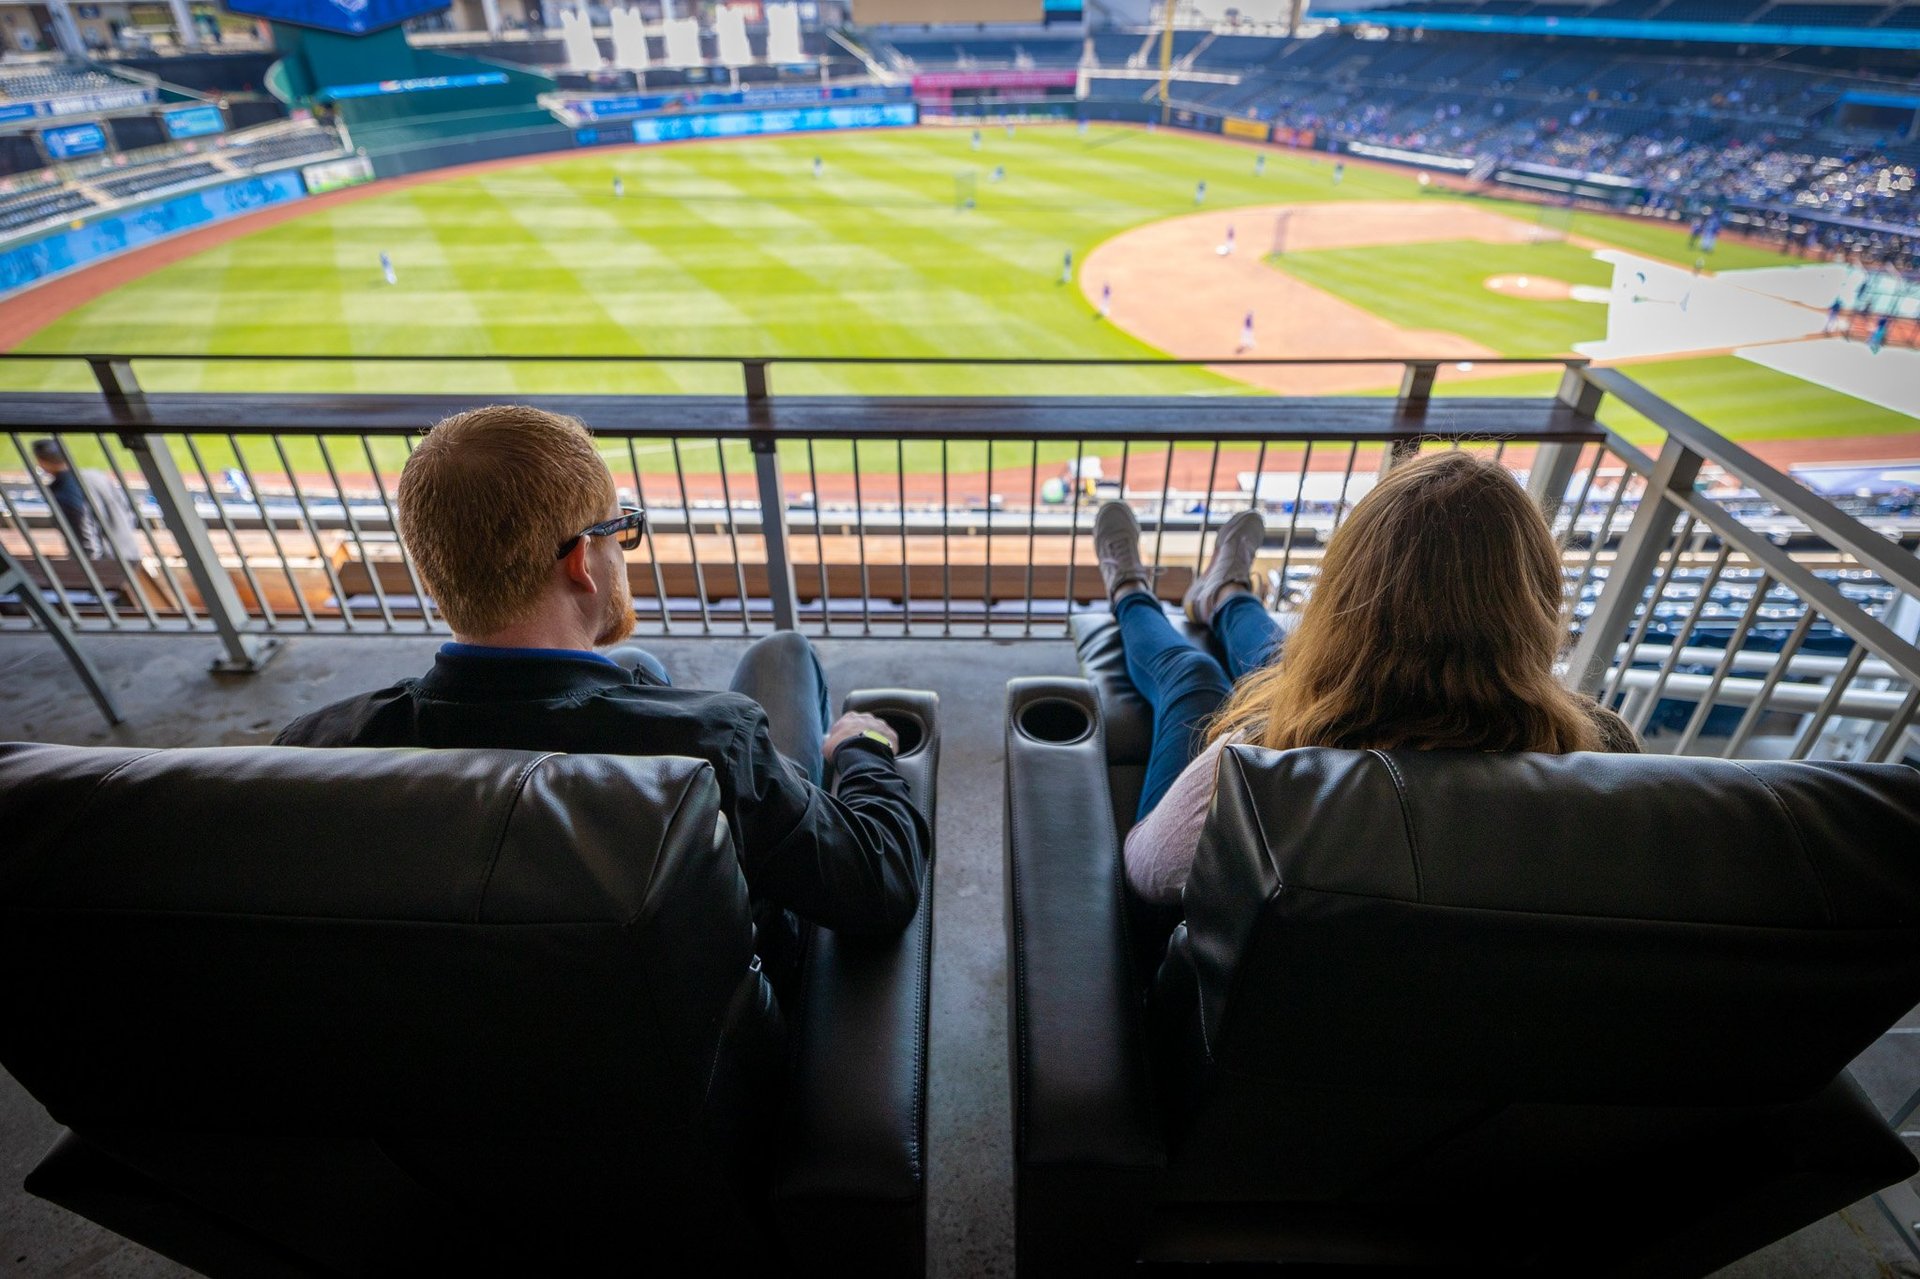 Guests sitting in B&B Recliners at Kauffman Stadium watching a Royals game